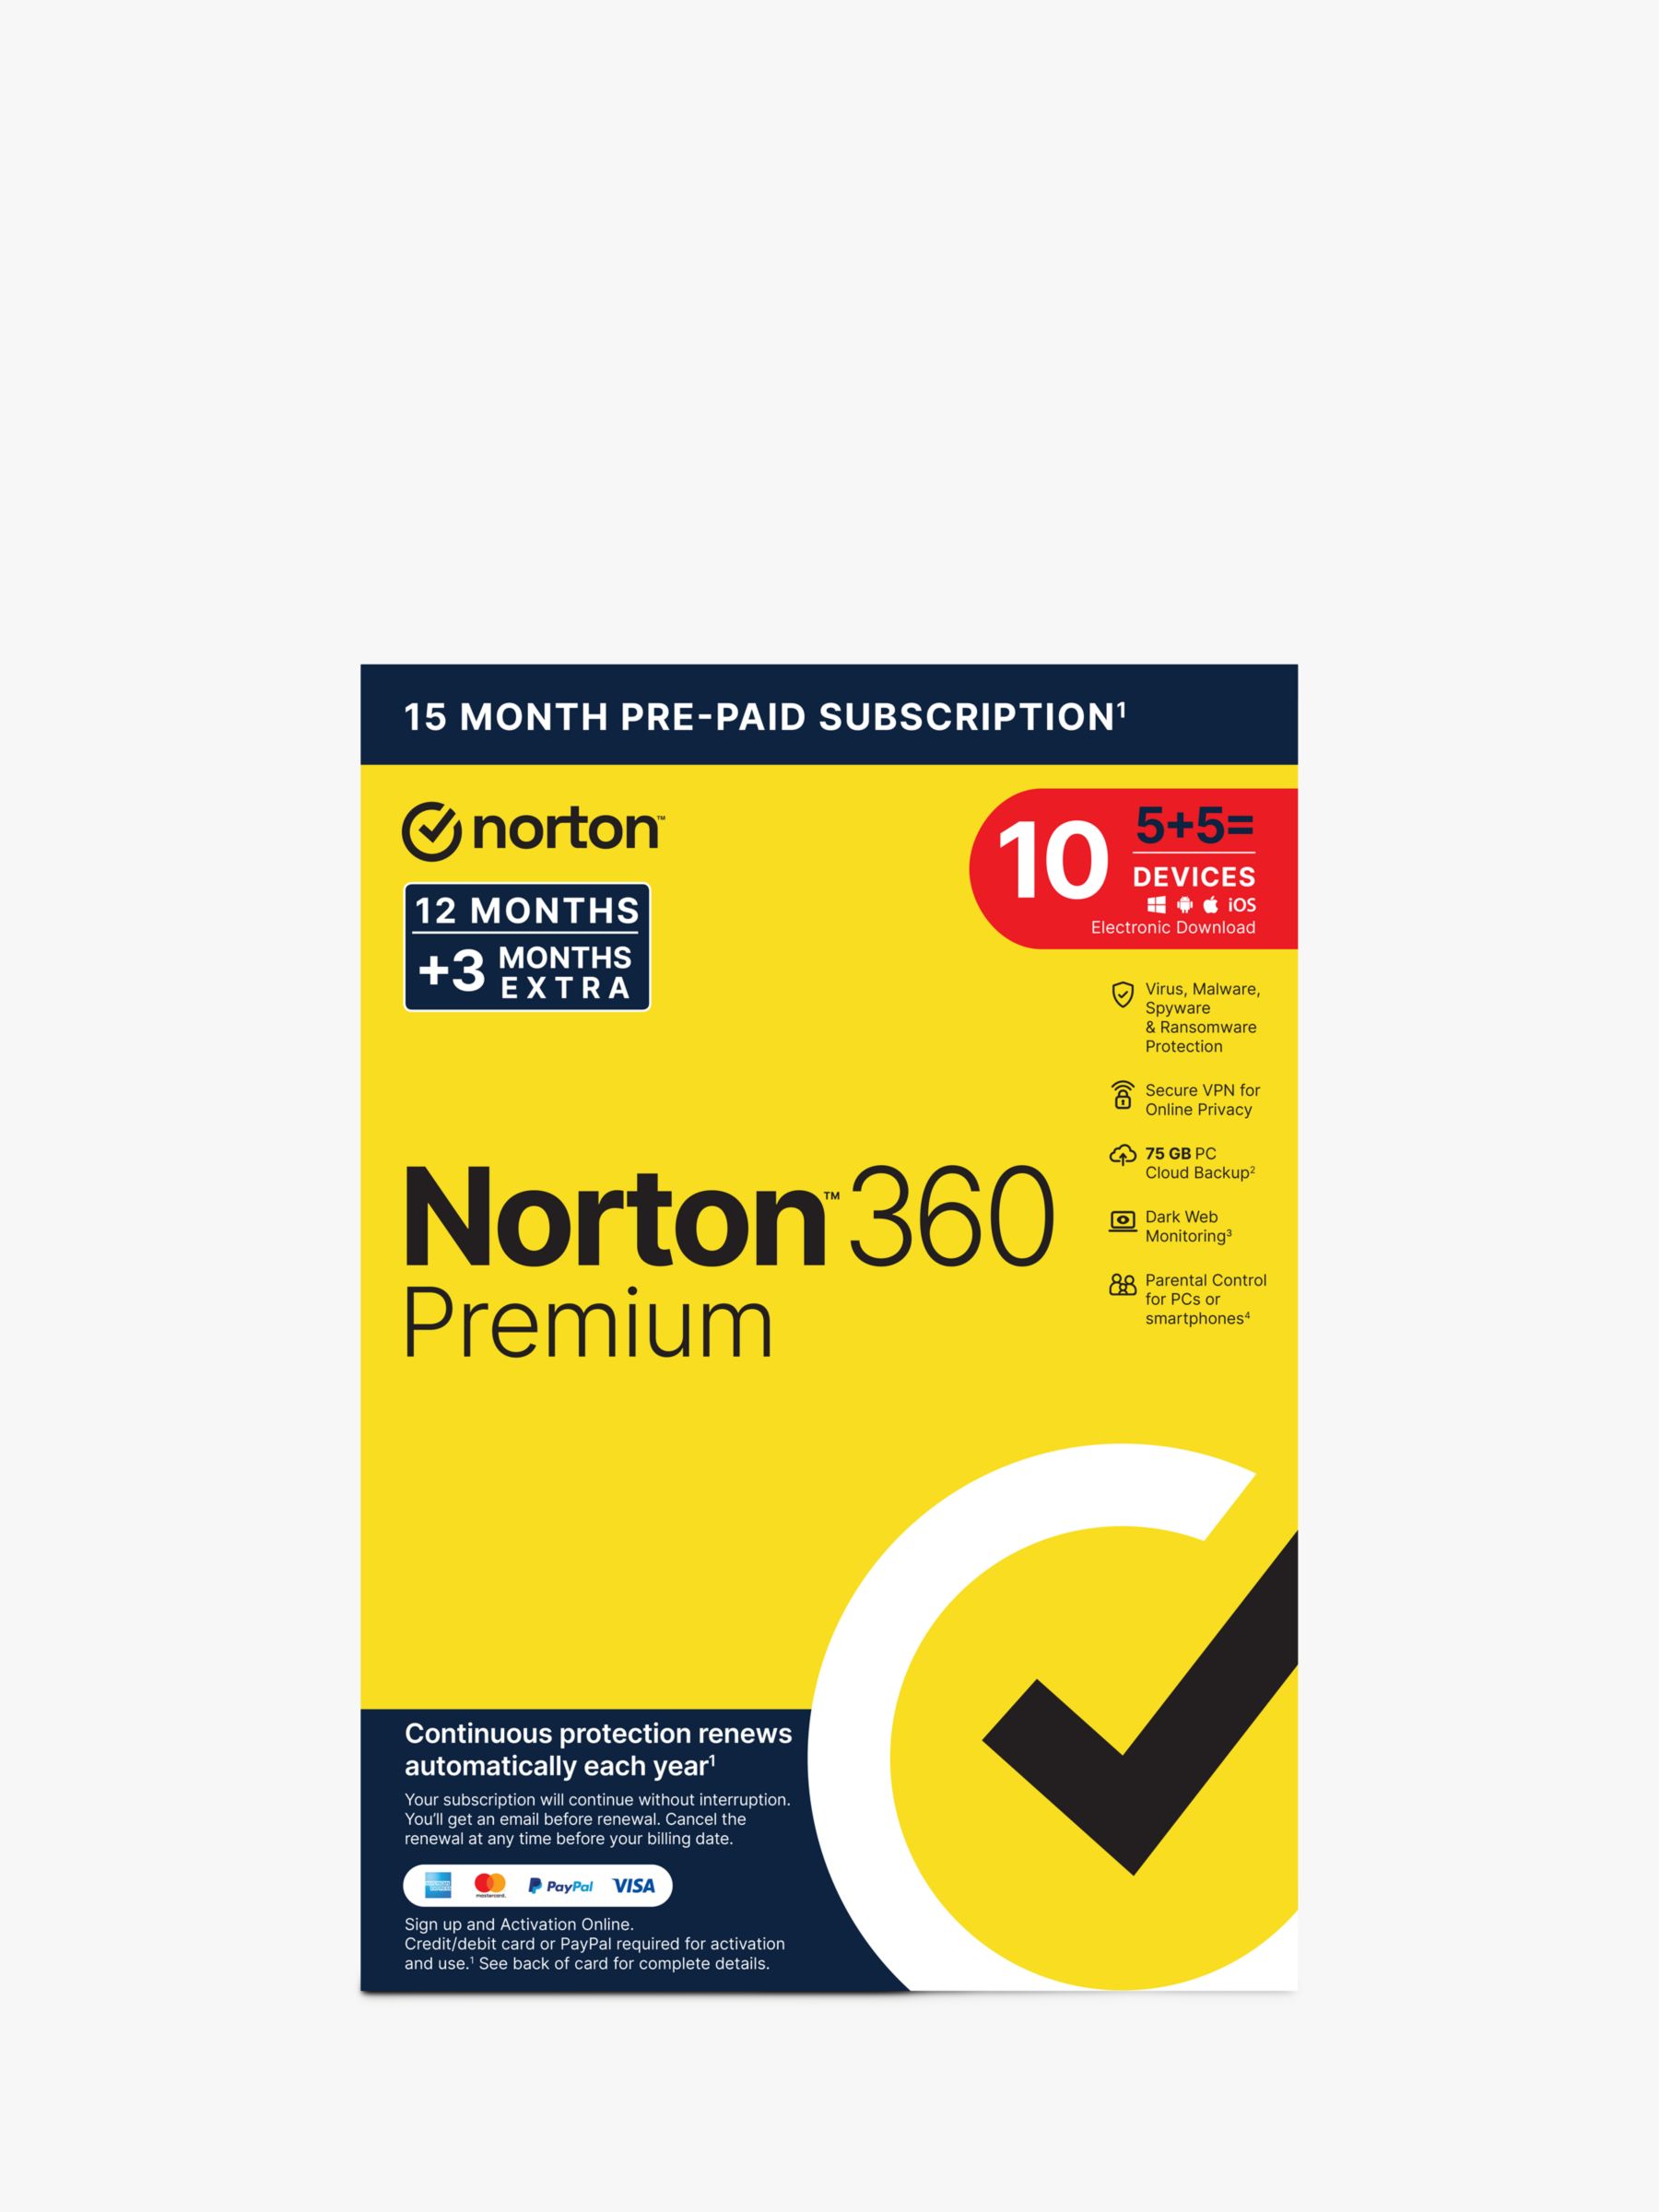 norton-360-premium-15-months-pre-paid-subscription-for-5-devices-and-5